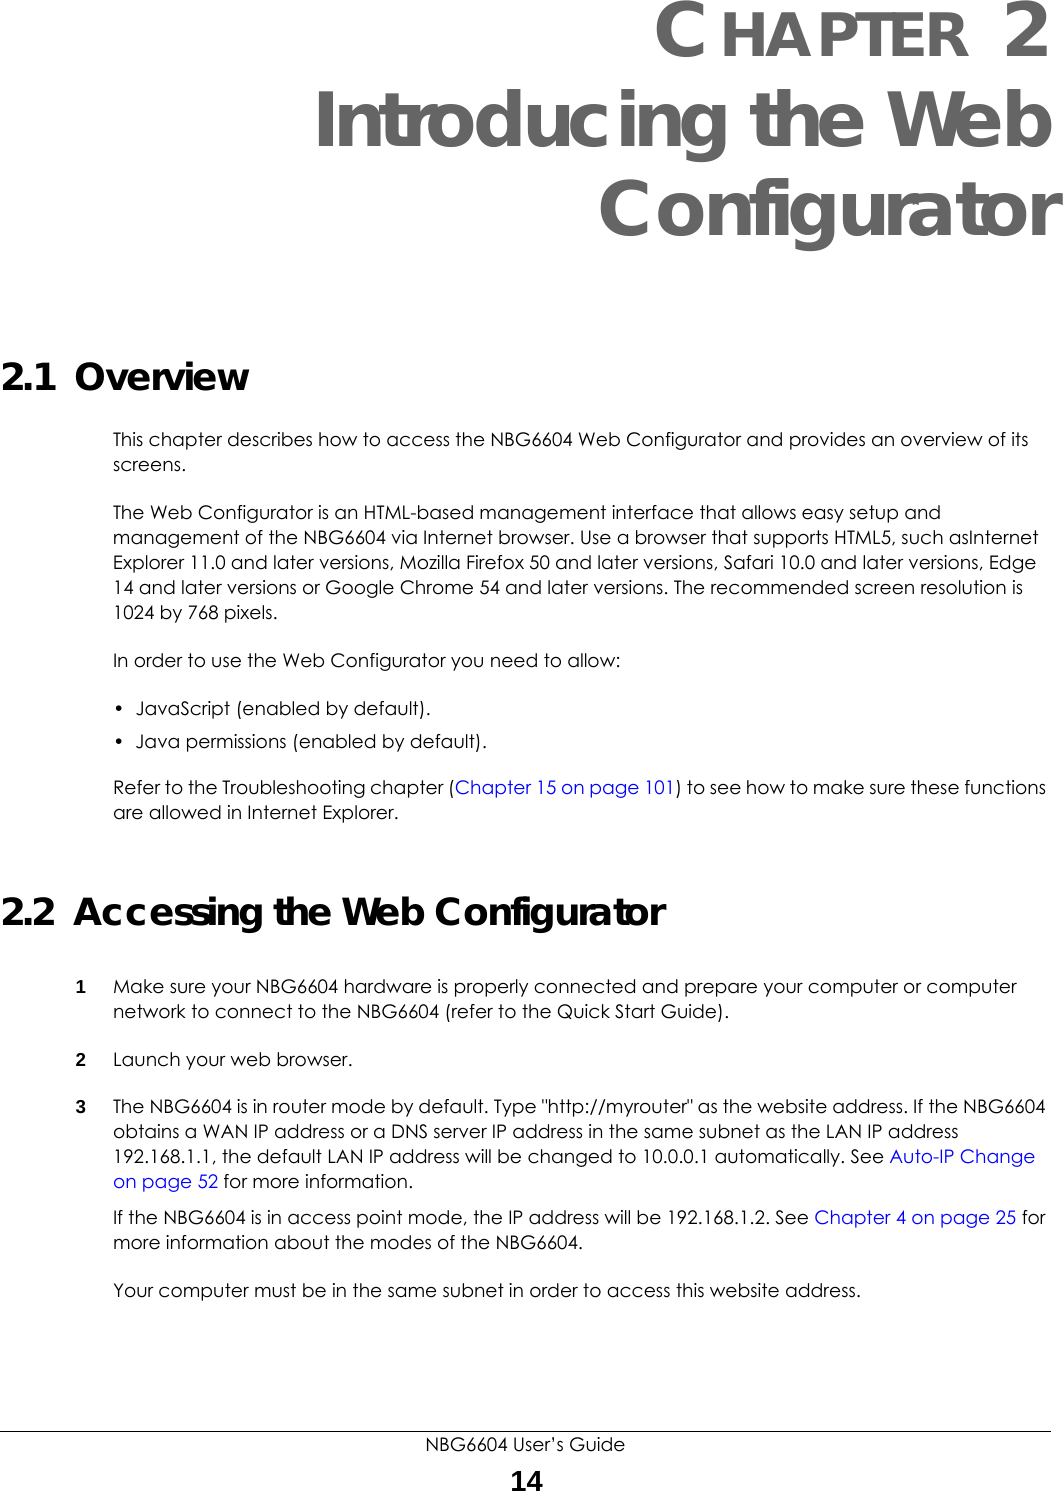 NBG6604 User’s Guide14CHAPTER 2 Introducing the Web Configurator2.1  OverviewThis chapter describes how to access the NBG6604 Web Configurator and provides an overview of its screens.The Web Configurator is an HTML-based management interface that allows easy setup and management of the NBG6604 via Internet browser. Use a browser that supports HTML5, such asInternet Explorer 11.0 and later versions, Mozilla Firefox 50 and later versions, Safari 10.0 and later versions, Edge 14 and later versions or Google Chrome 54 and later versions. The recommended screen resolution is 1024 by 768 pixels.In order to use the Web Configurator you need to allow:• JavaScript (enabled by default).• Java permissions (enabled by default).Refer to the Troubleshooting chapter (Chapter 15 on page 101) to see how to make sure these functions are allowed in Internet Explorer.2.2  Accessing the Web Configurator1Make sure your NBG6604 hardware is properly connected and prepare your computer or computer network to connect to the NBG6604 (refer to the Quick Start Guide).2Launch your web browser.3The NBG6604 is in router mode by default. Type &quot;http://myrouter&quot; as the website address. If the NBG6604 obtains a WAN IP address or a DNS server IP address in the same subnet as the LAN IP address 192.168.1.1, the default LAN IP address will be changed to 10.0.0.1 automatically. See Auto-IP Change on page 52 for more information.If the NBG6604 is in access point mode, the IP address will be 192.168.1.2. See Chapter 4 on page 25 for more information about the modes of the NBG6604.Your computer must be in the same subnet in order to access this website address.